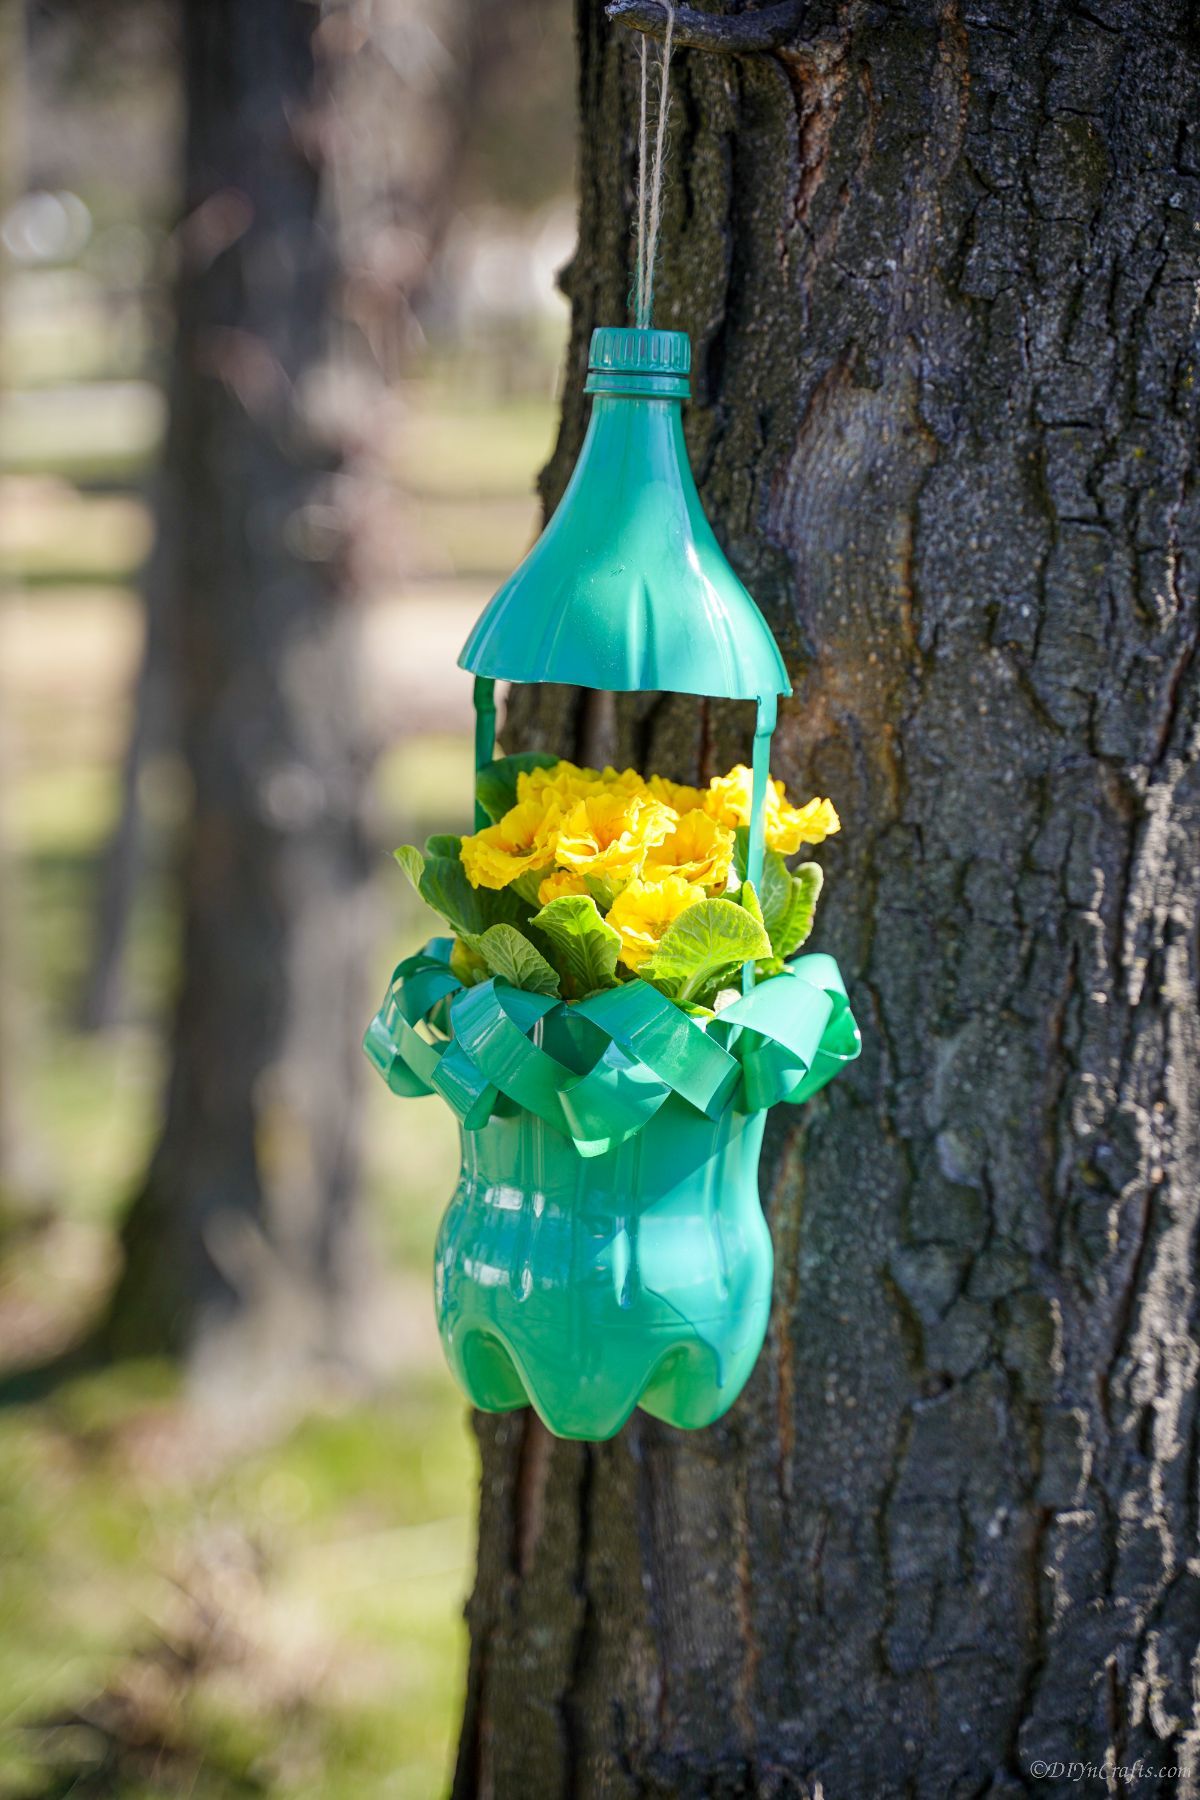 upcycled bottle planter hanging in tree with yellow flowers